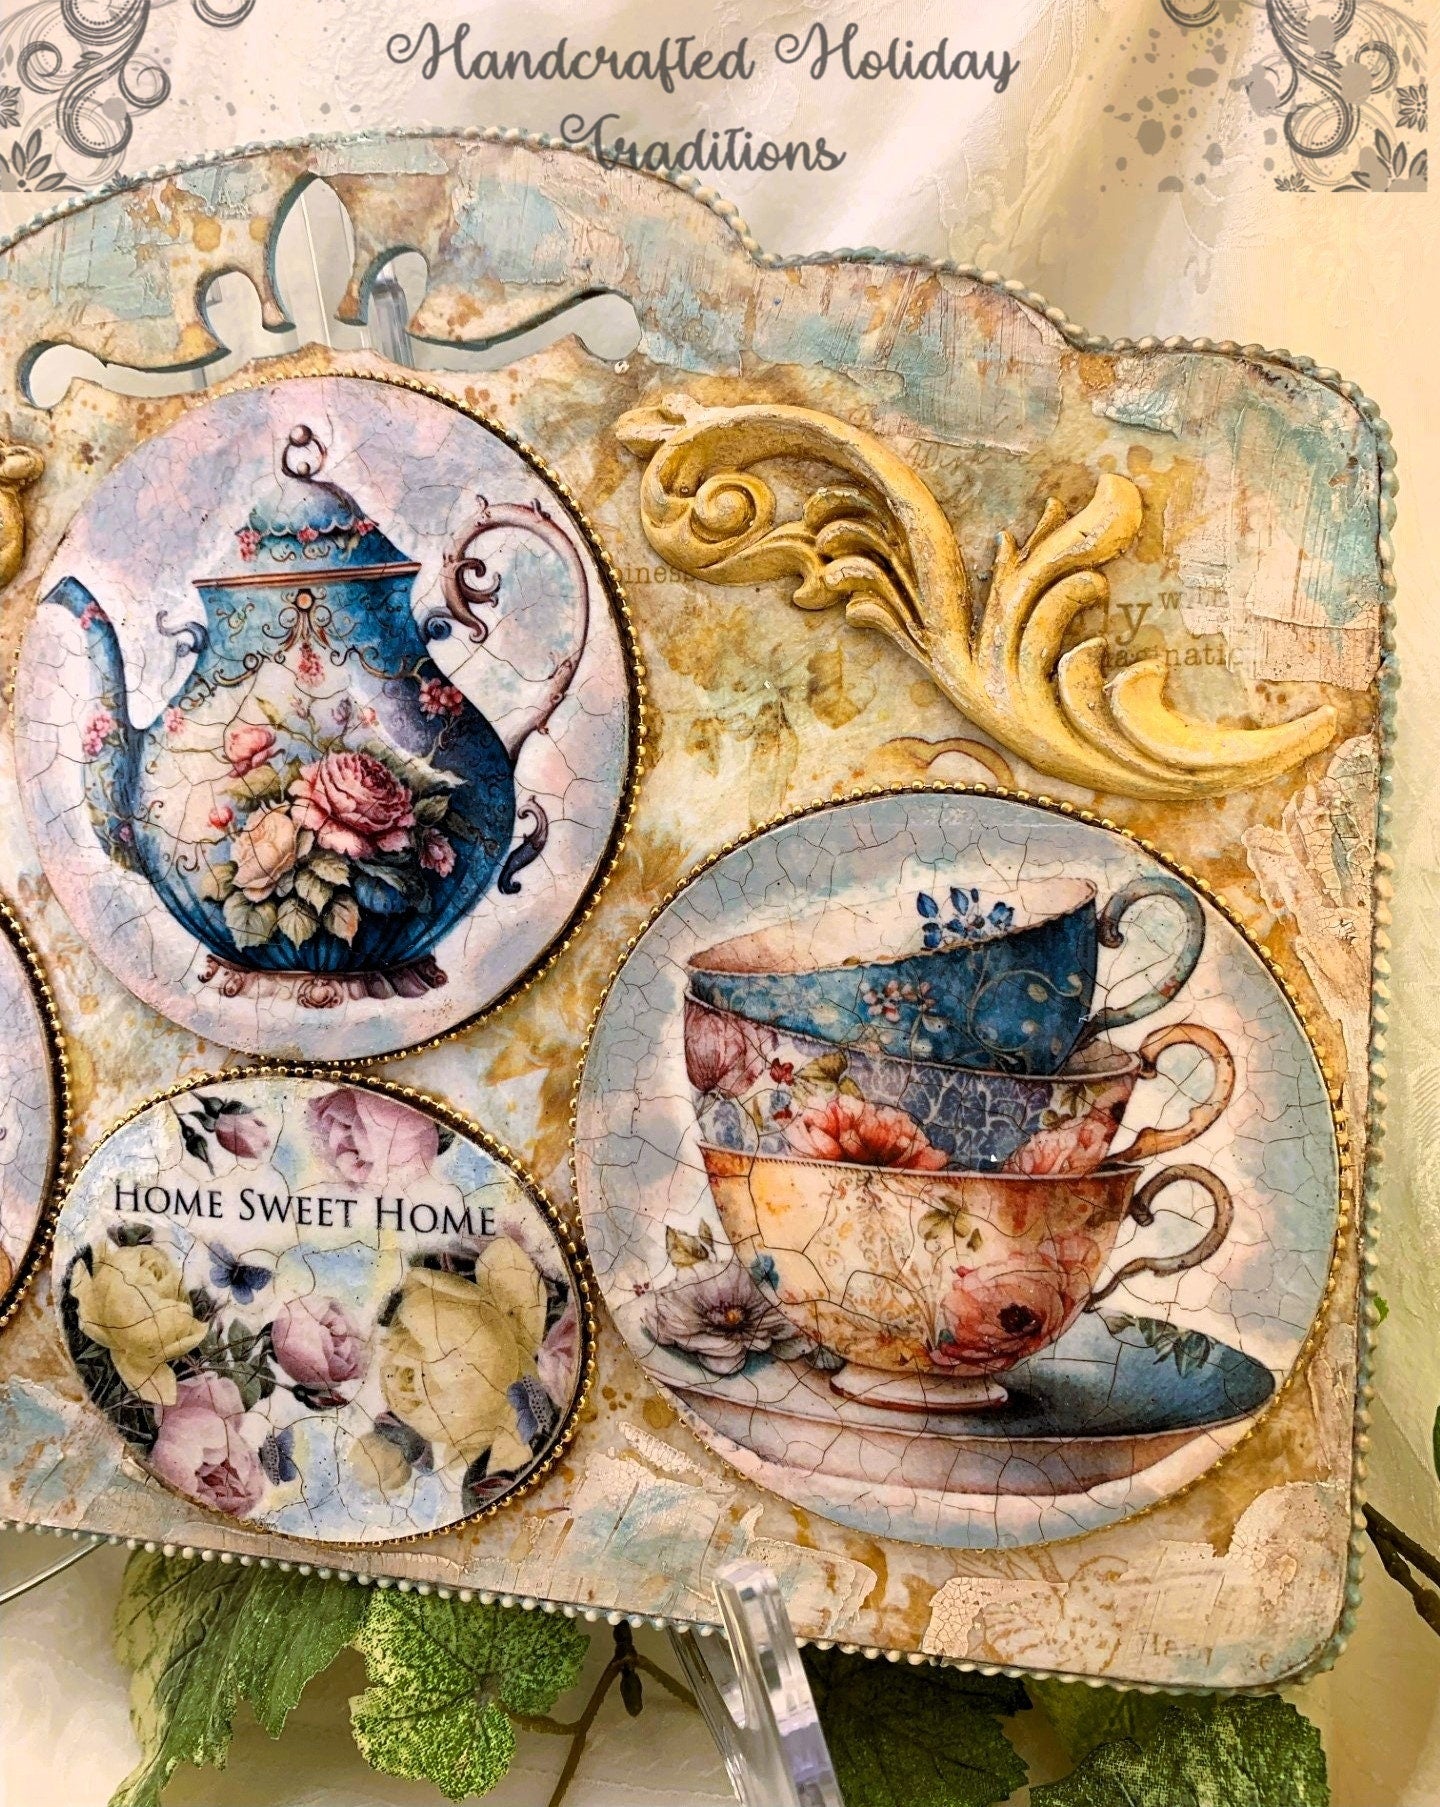 Handcrafted, Mixed Media, Shabby Chic, Decoupage, Tea Cups, Tea Pot, Plaque, Vintage Style,  Antique Style, Wall, Home Decor, Laser Cut MDF